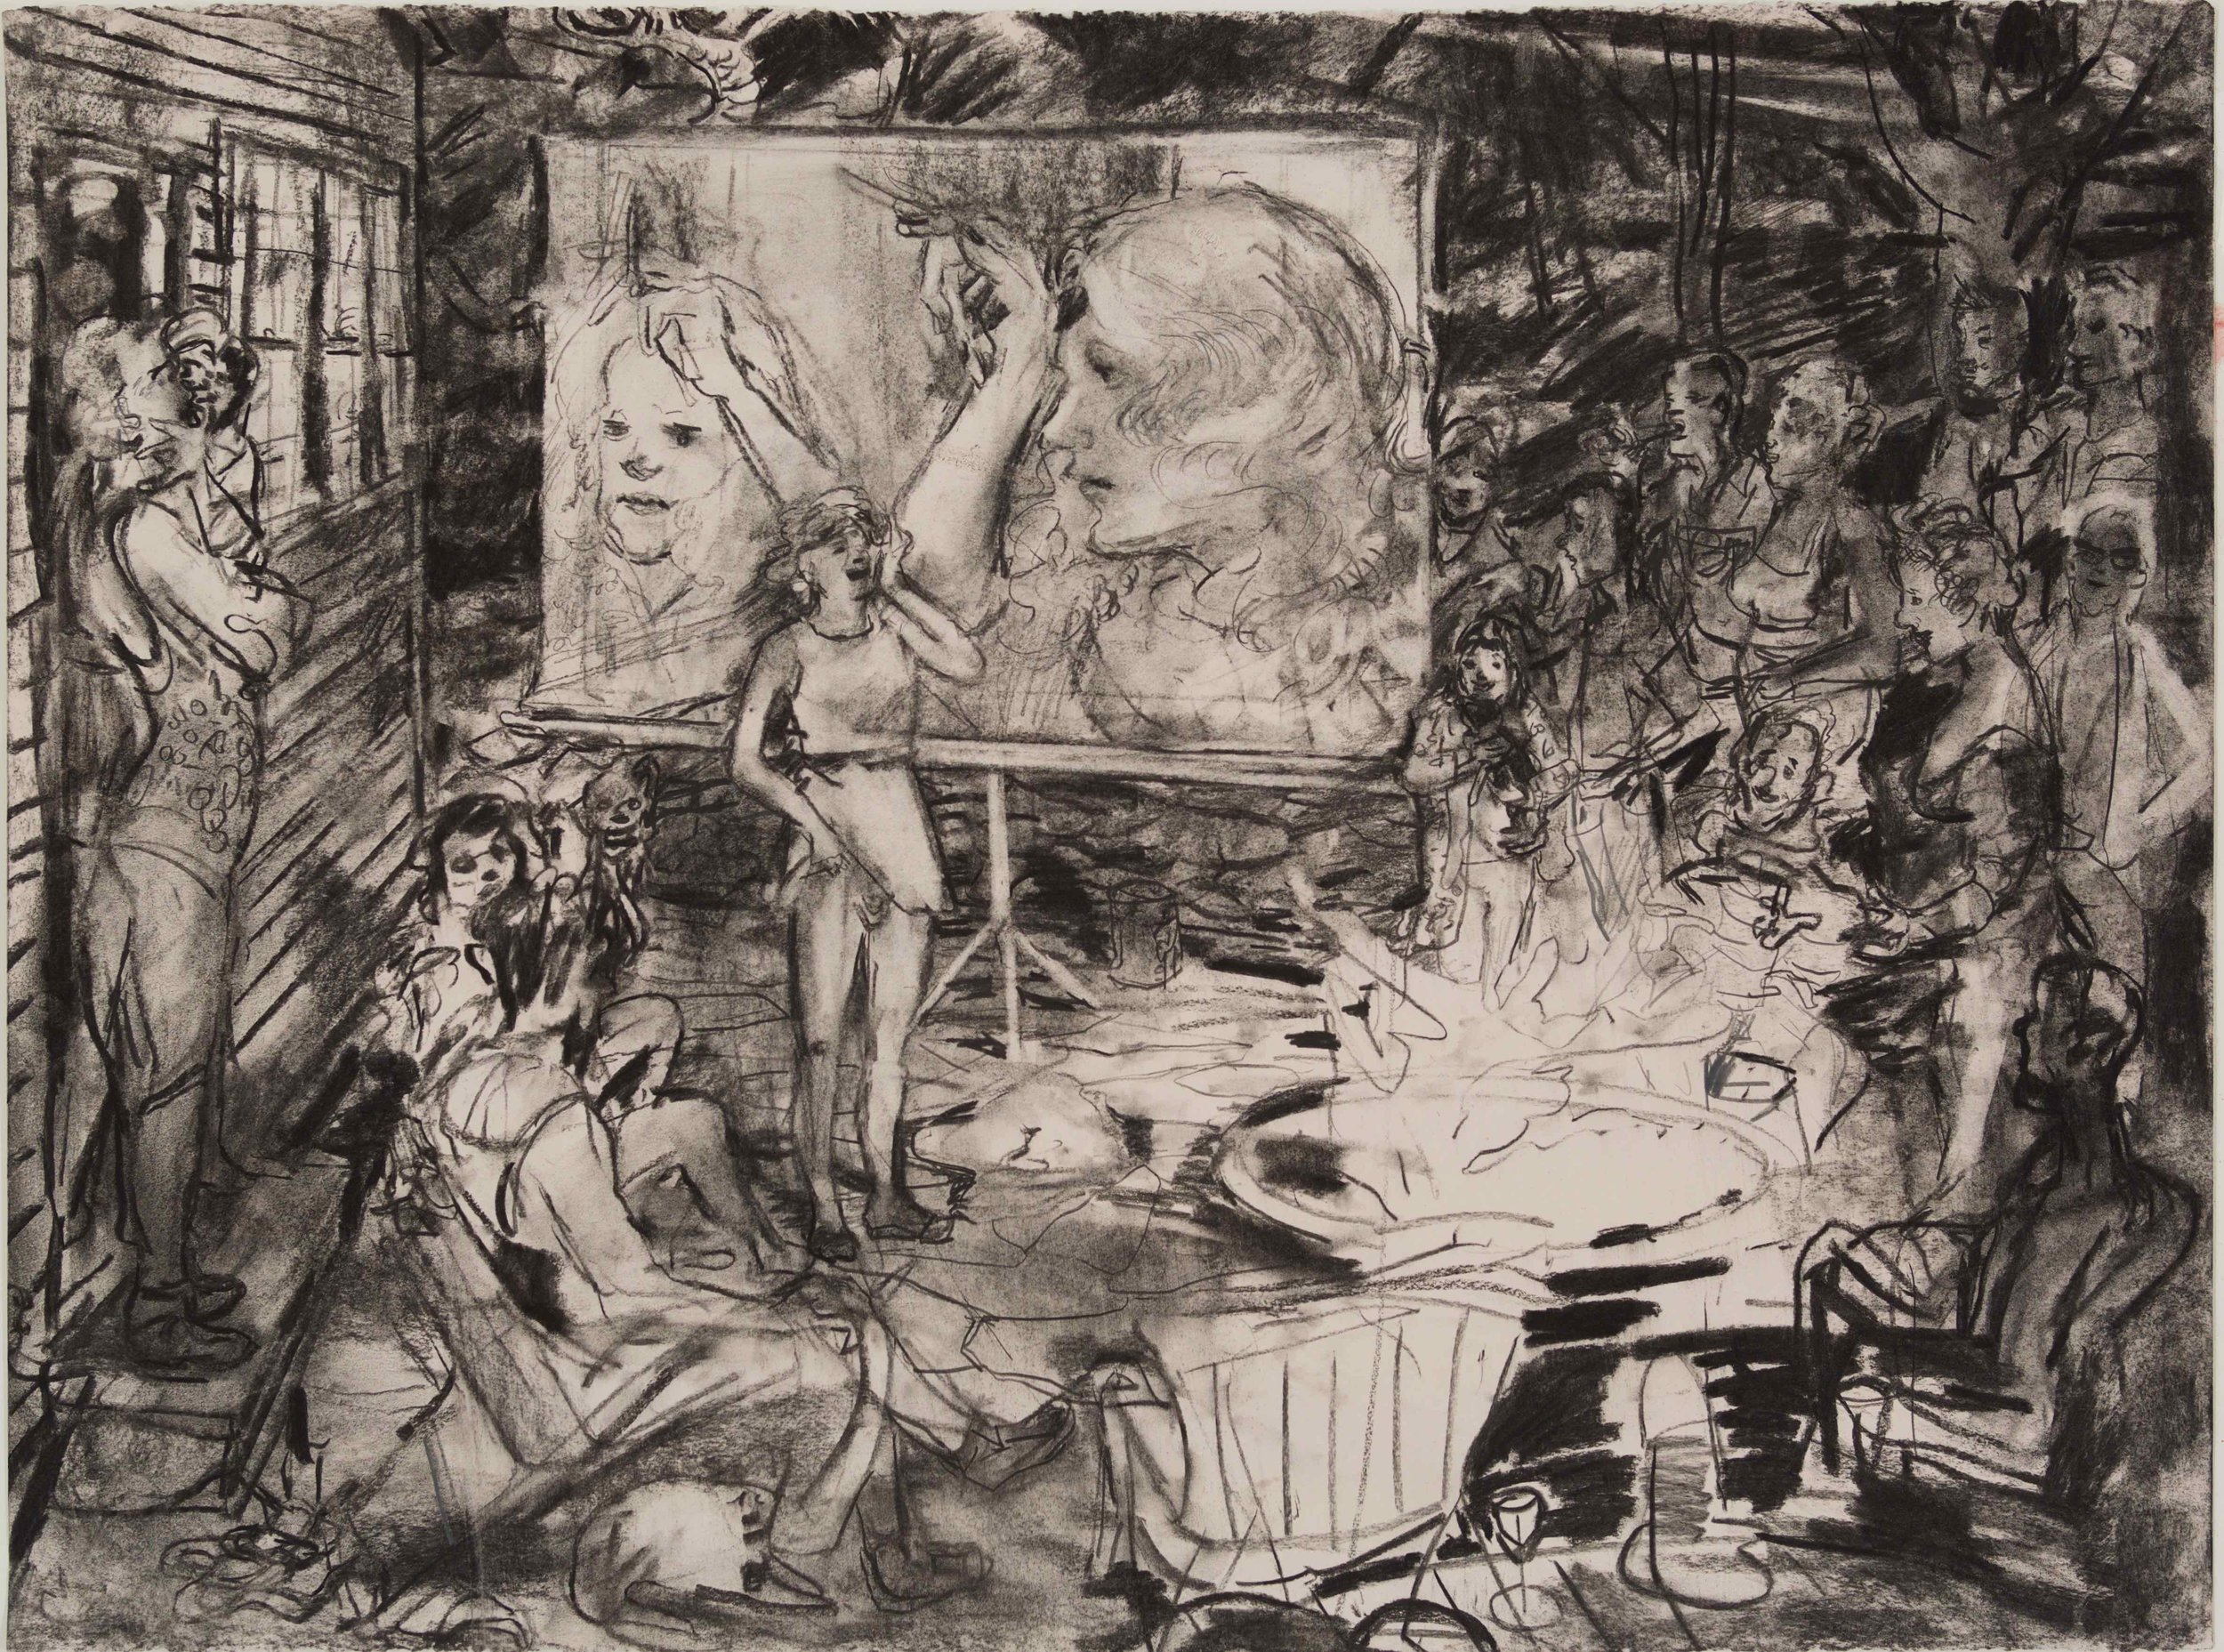 Gena School charcoal 28 by 40 inches 2016.jpg